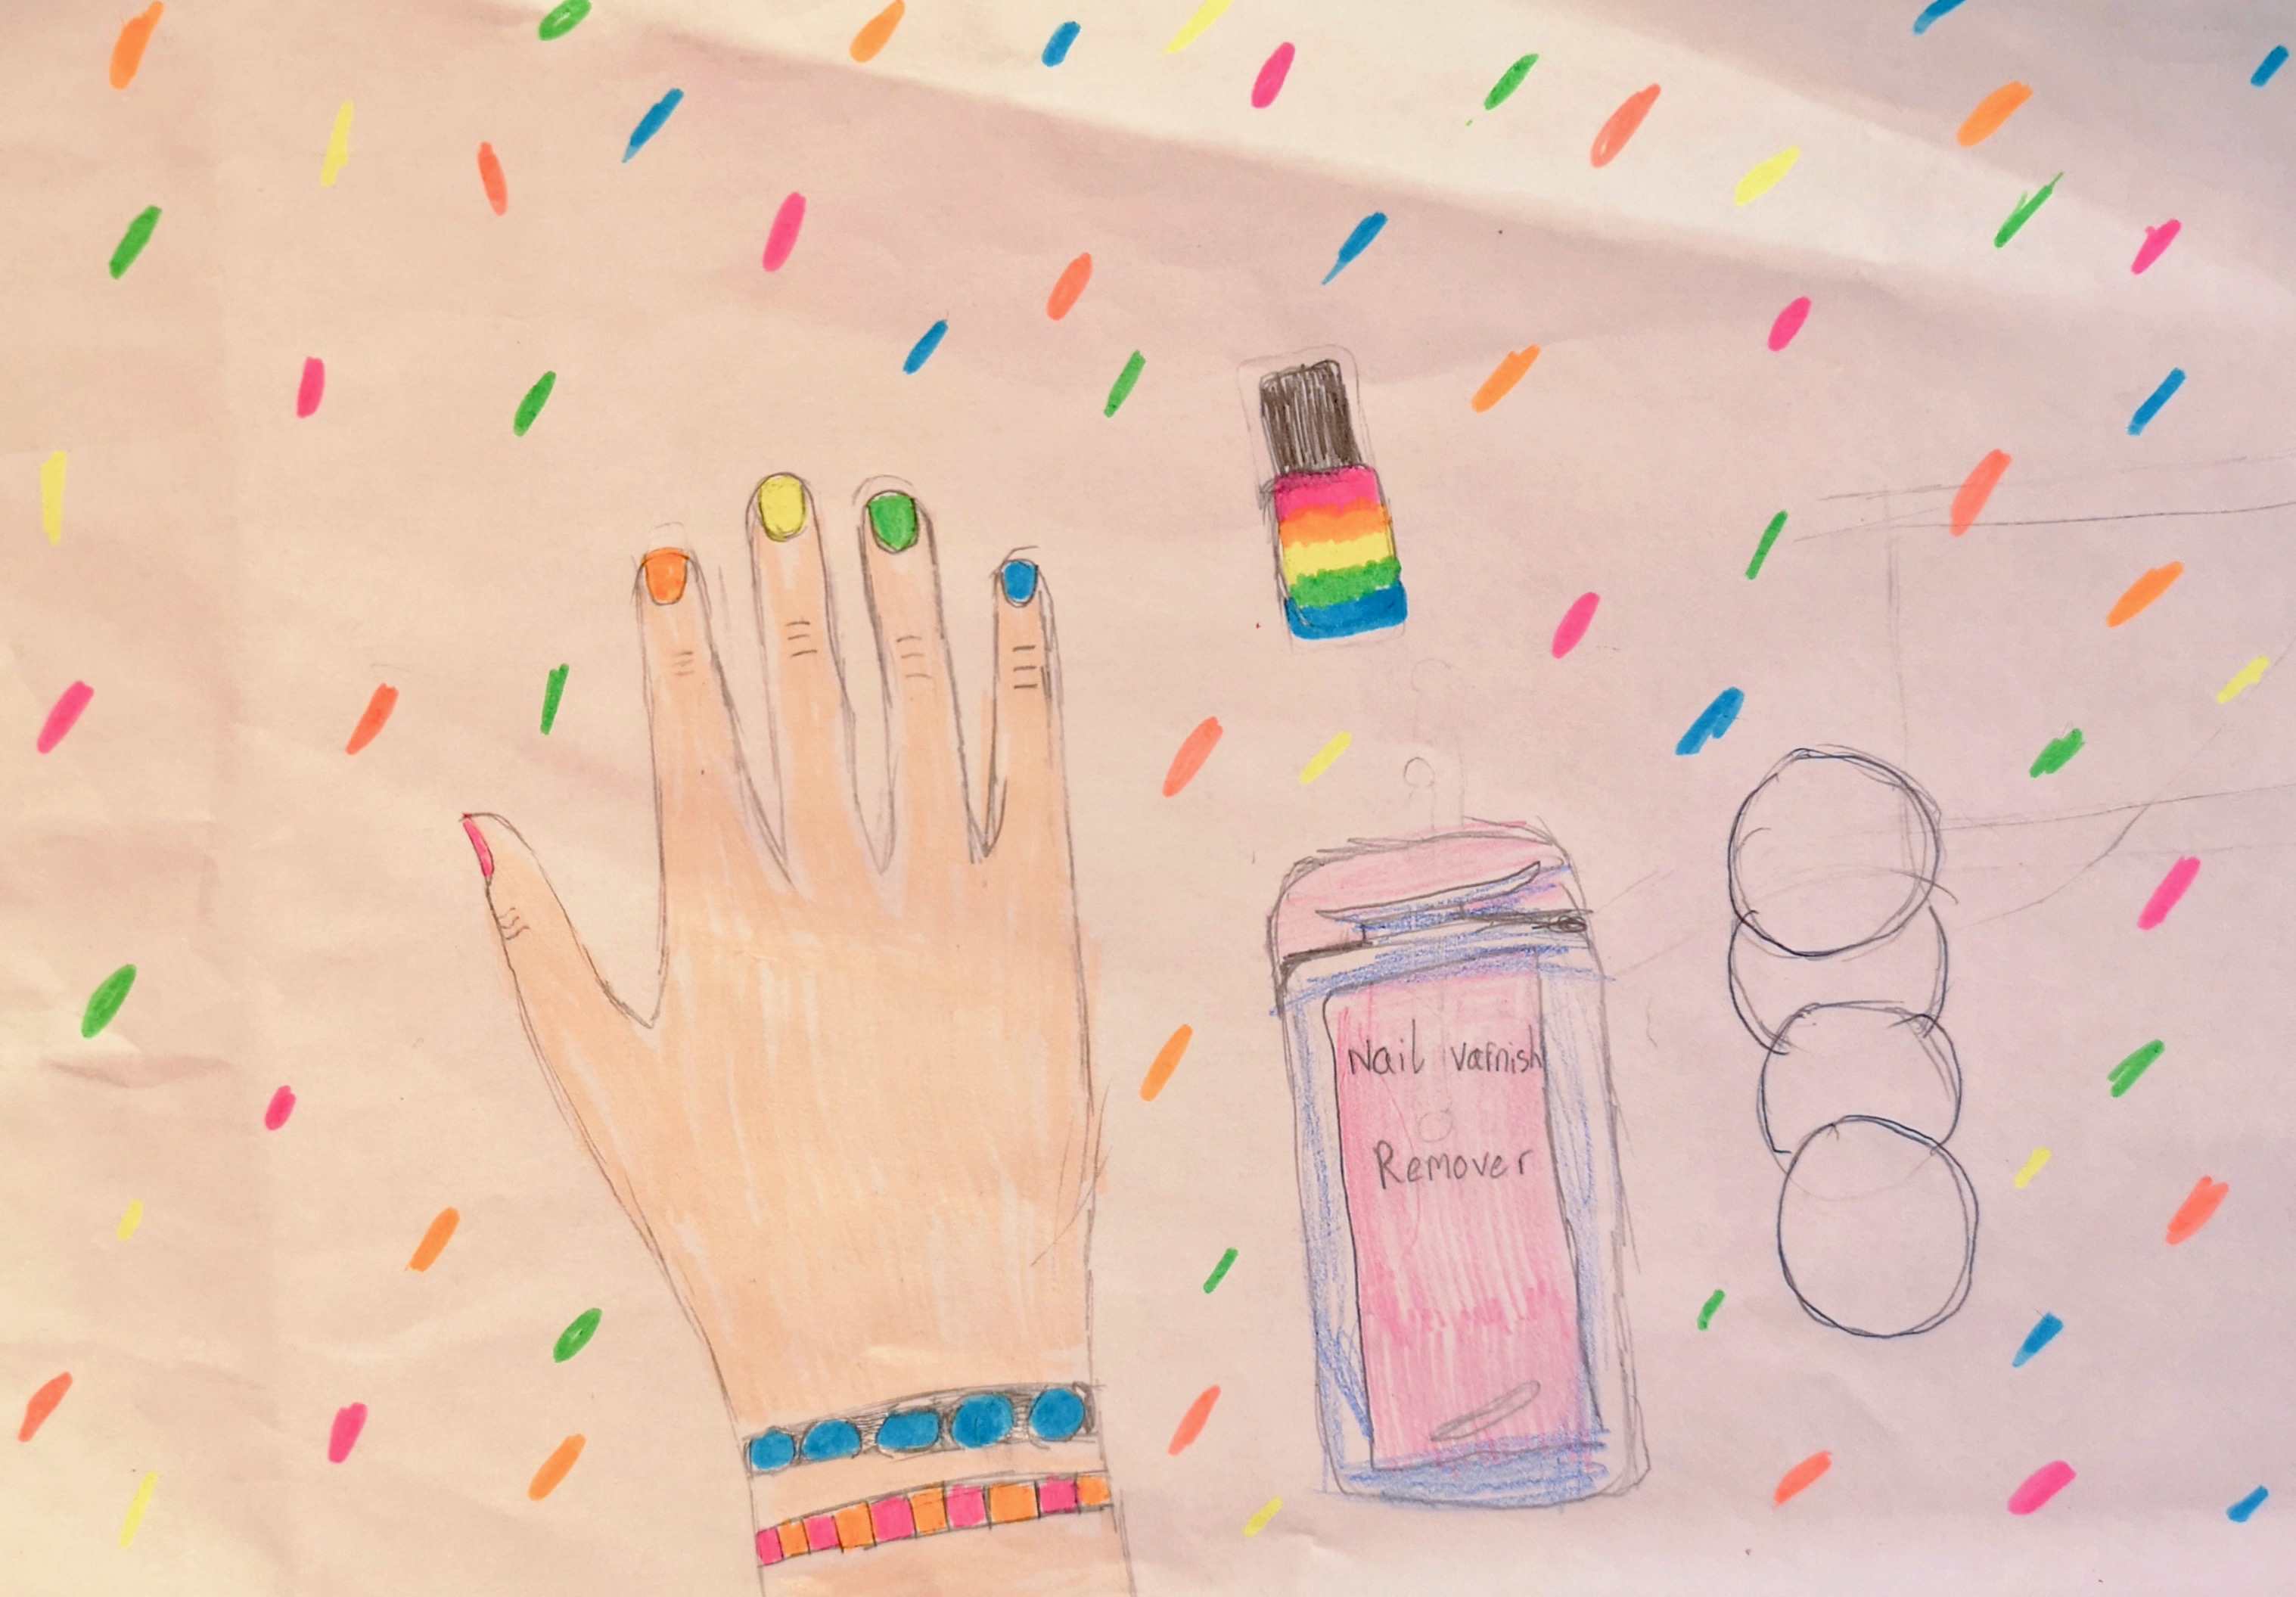 'Nails of the Rainbow' by Evanne (8) from Kildare